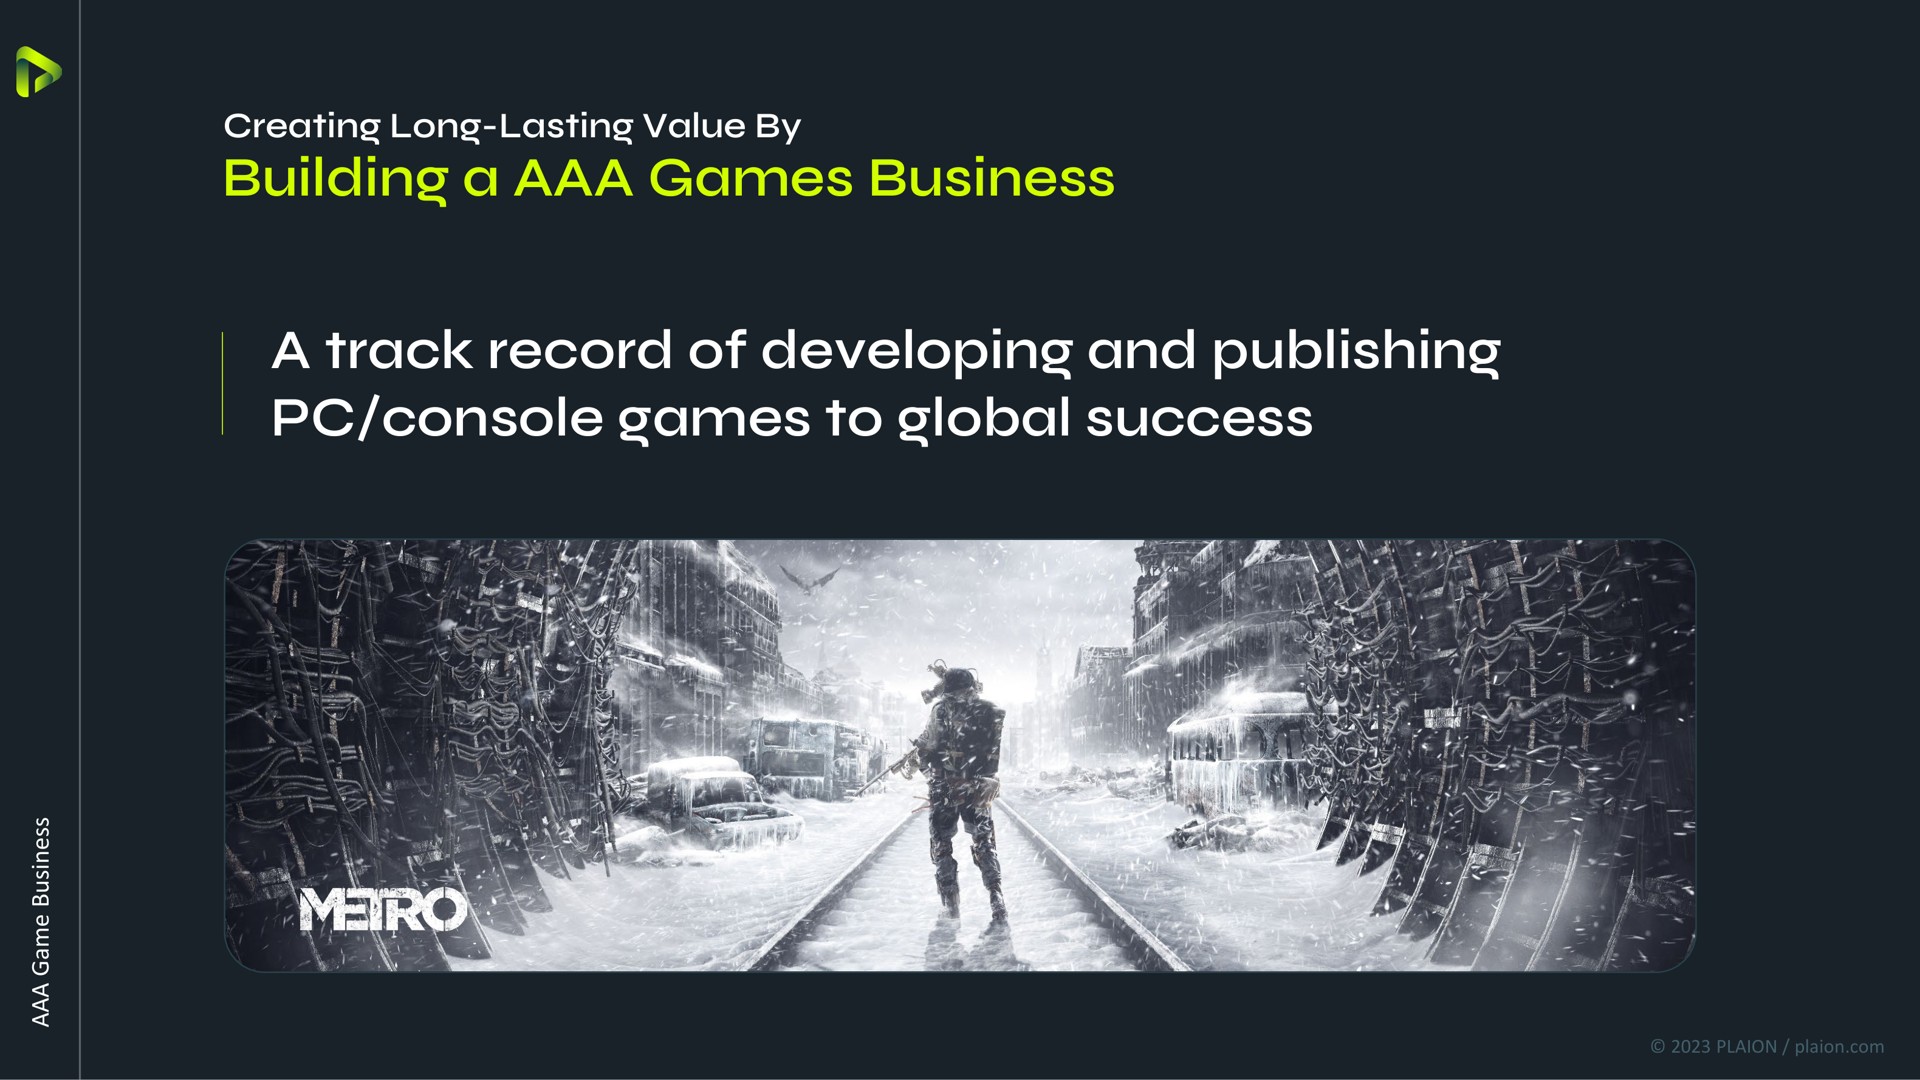 building a games business a track record of developing and publishing console games to global success | Embracer Group